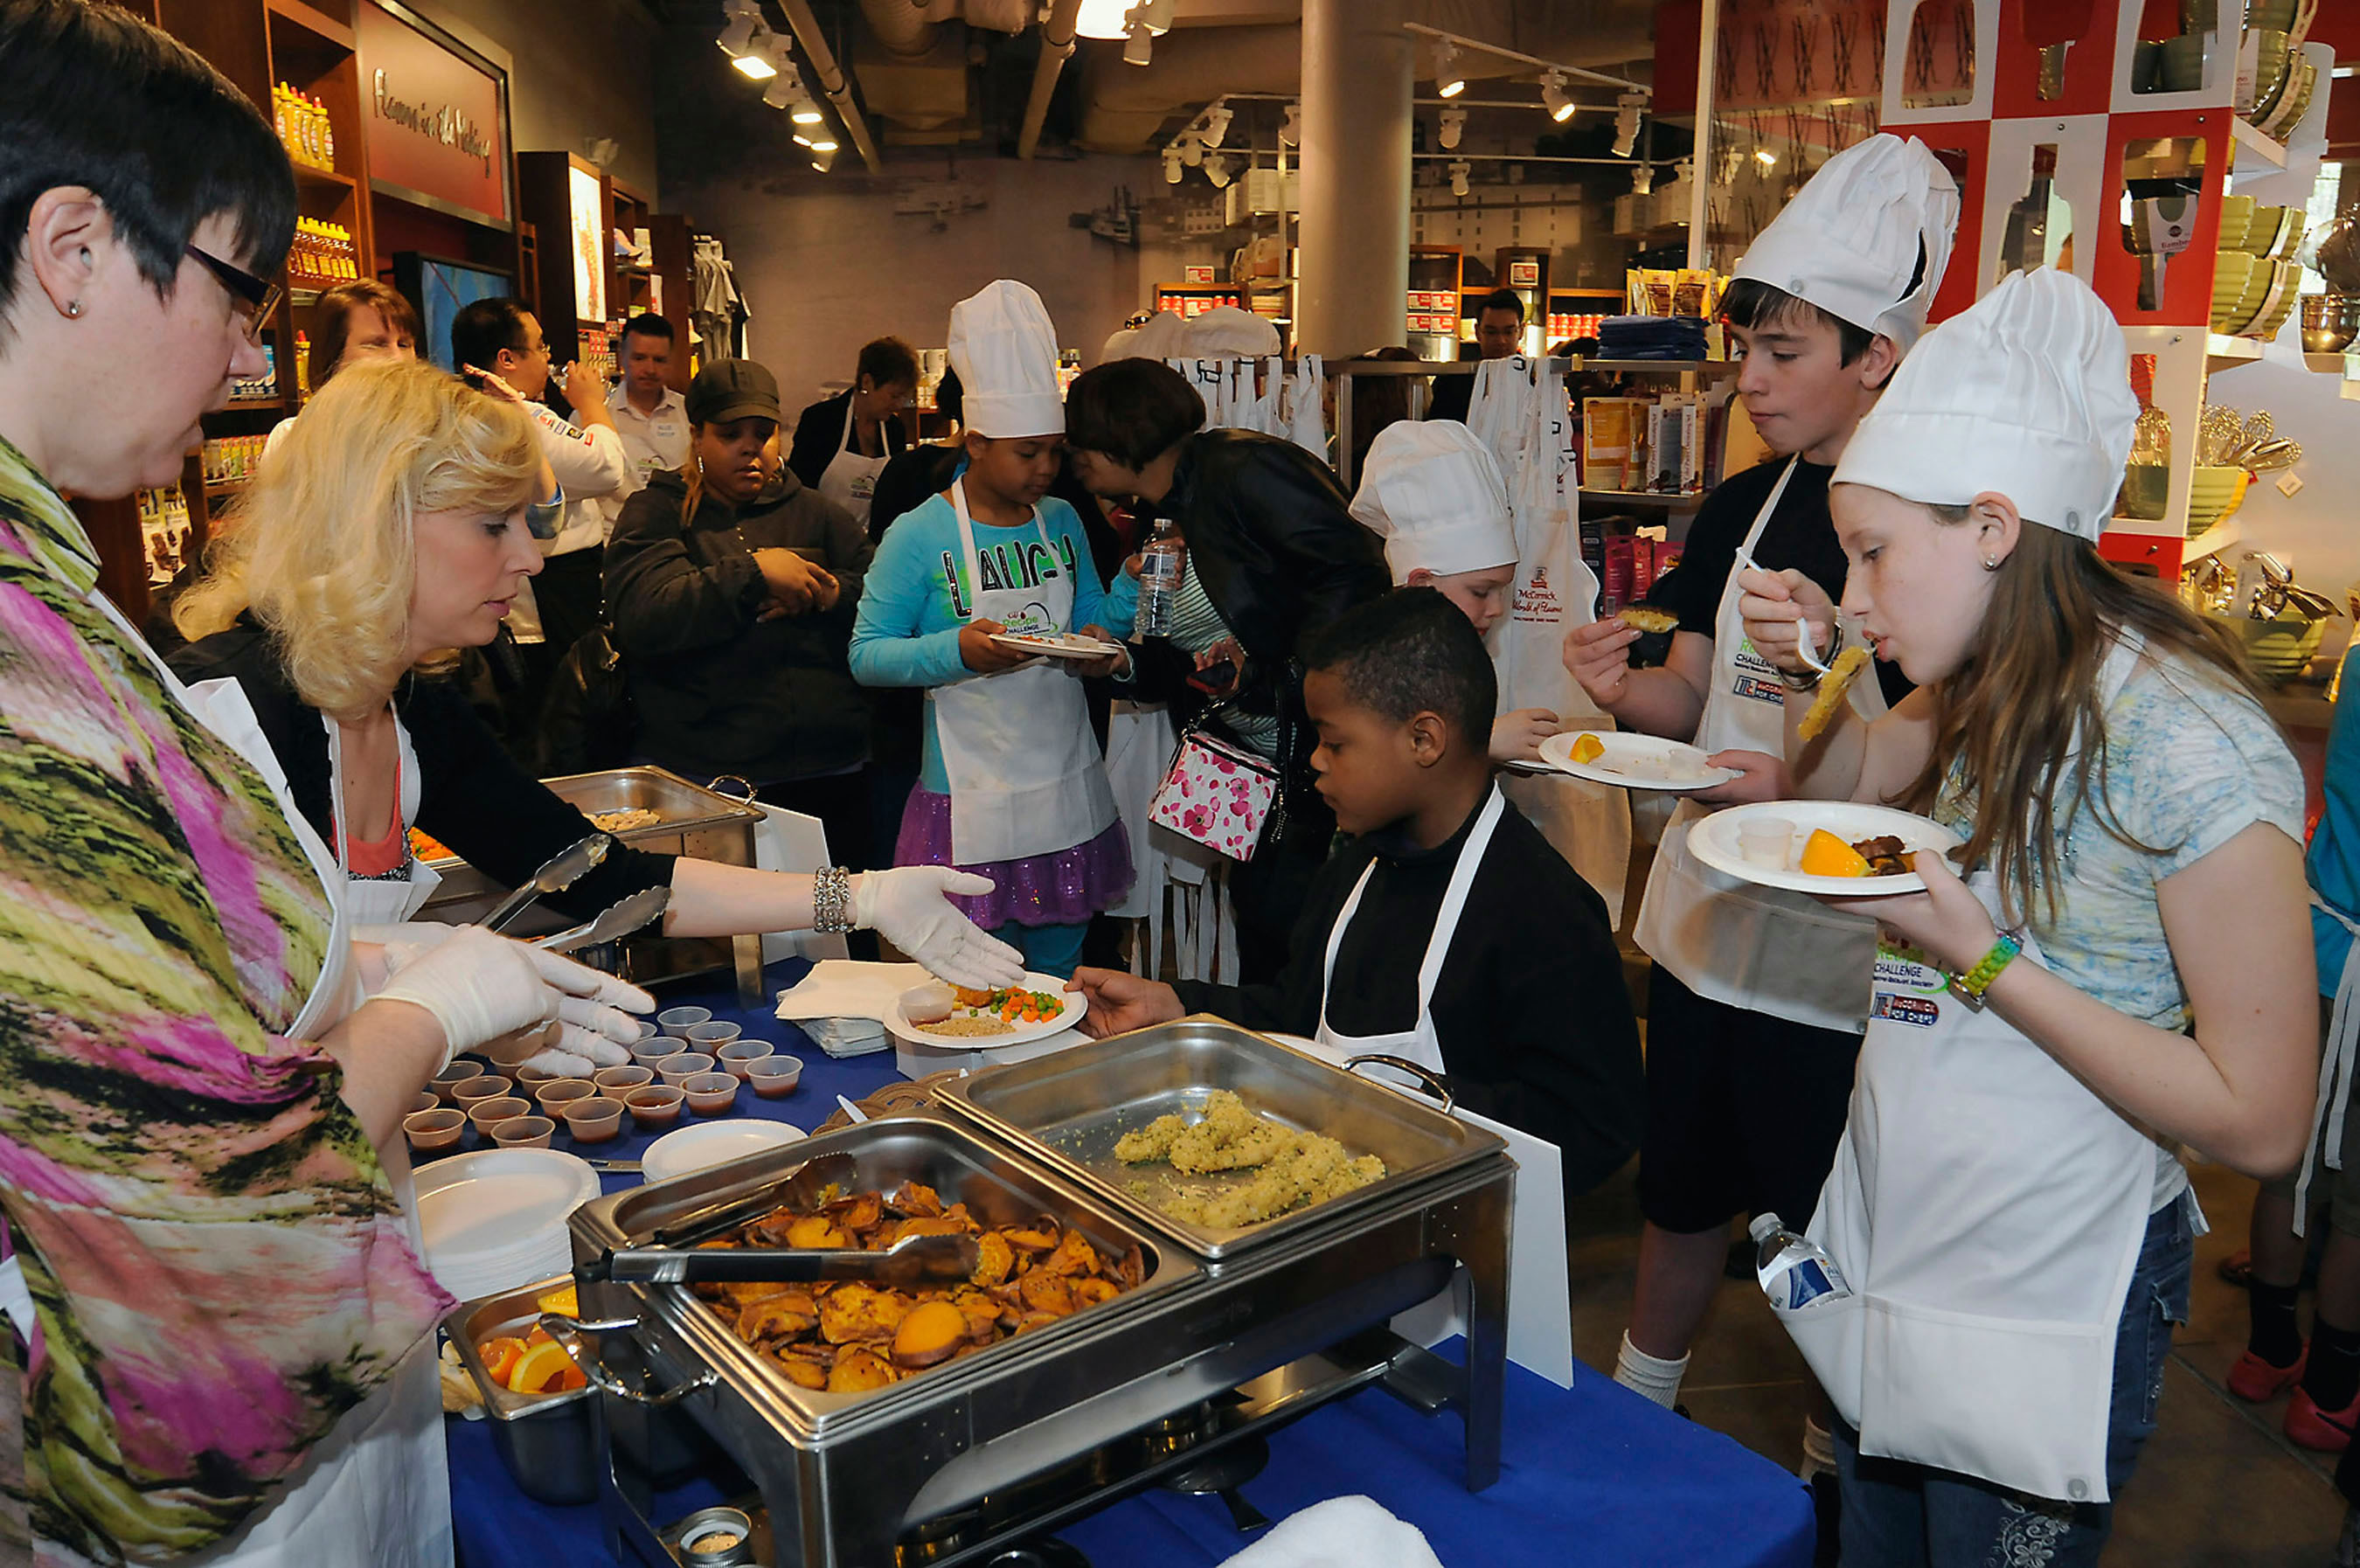 Local Baltimore children taste healthy restaurant dishes for the Kids Recipe Challenge, a nationwide contest from the National Restaurant Association sponsored by McCormick For Chefs. (PRNewsFoto/National Restaurant Association) (PRNewsFoto/NATIONAL RESTAURANT ASSOCIATION)